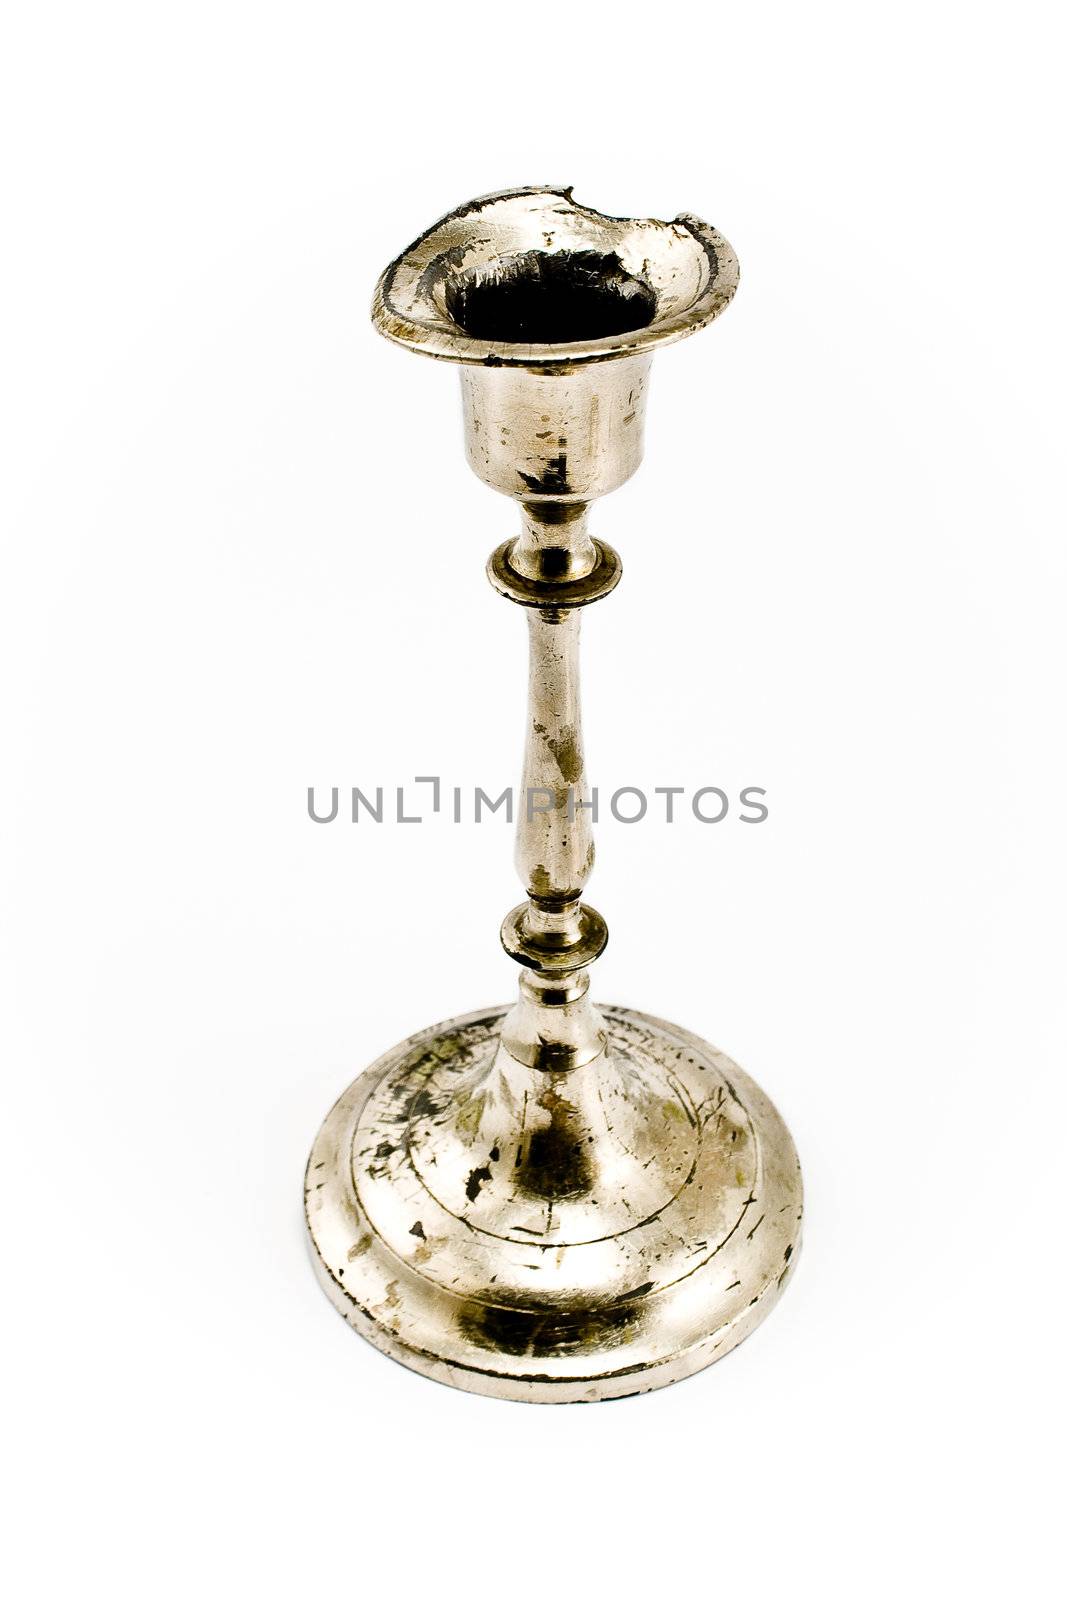 Antique silver classic candlestick by gavran333